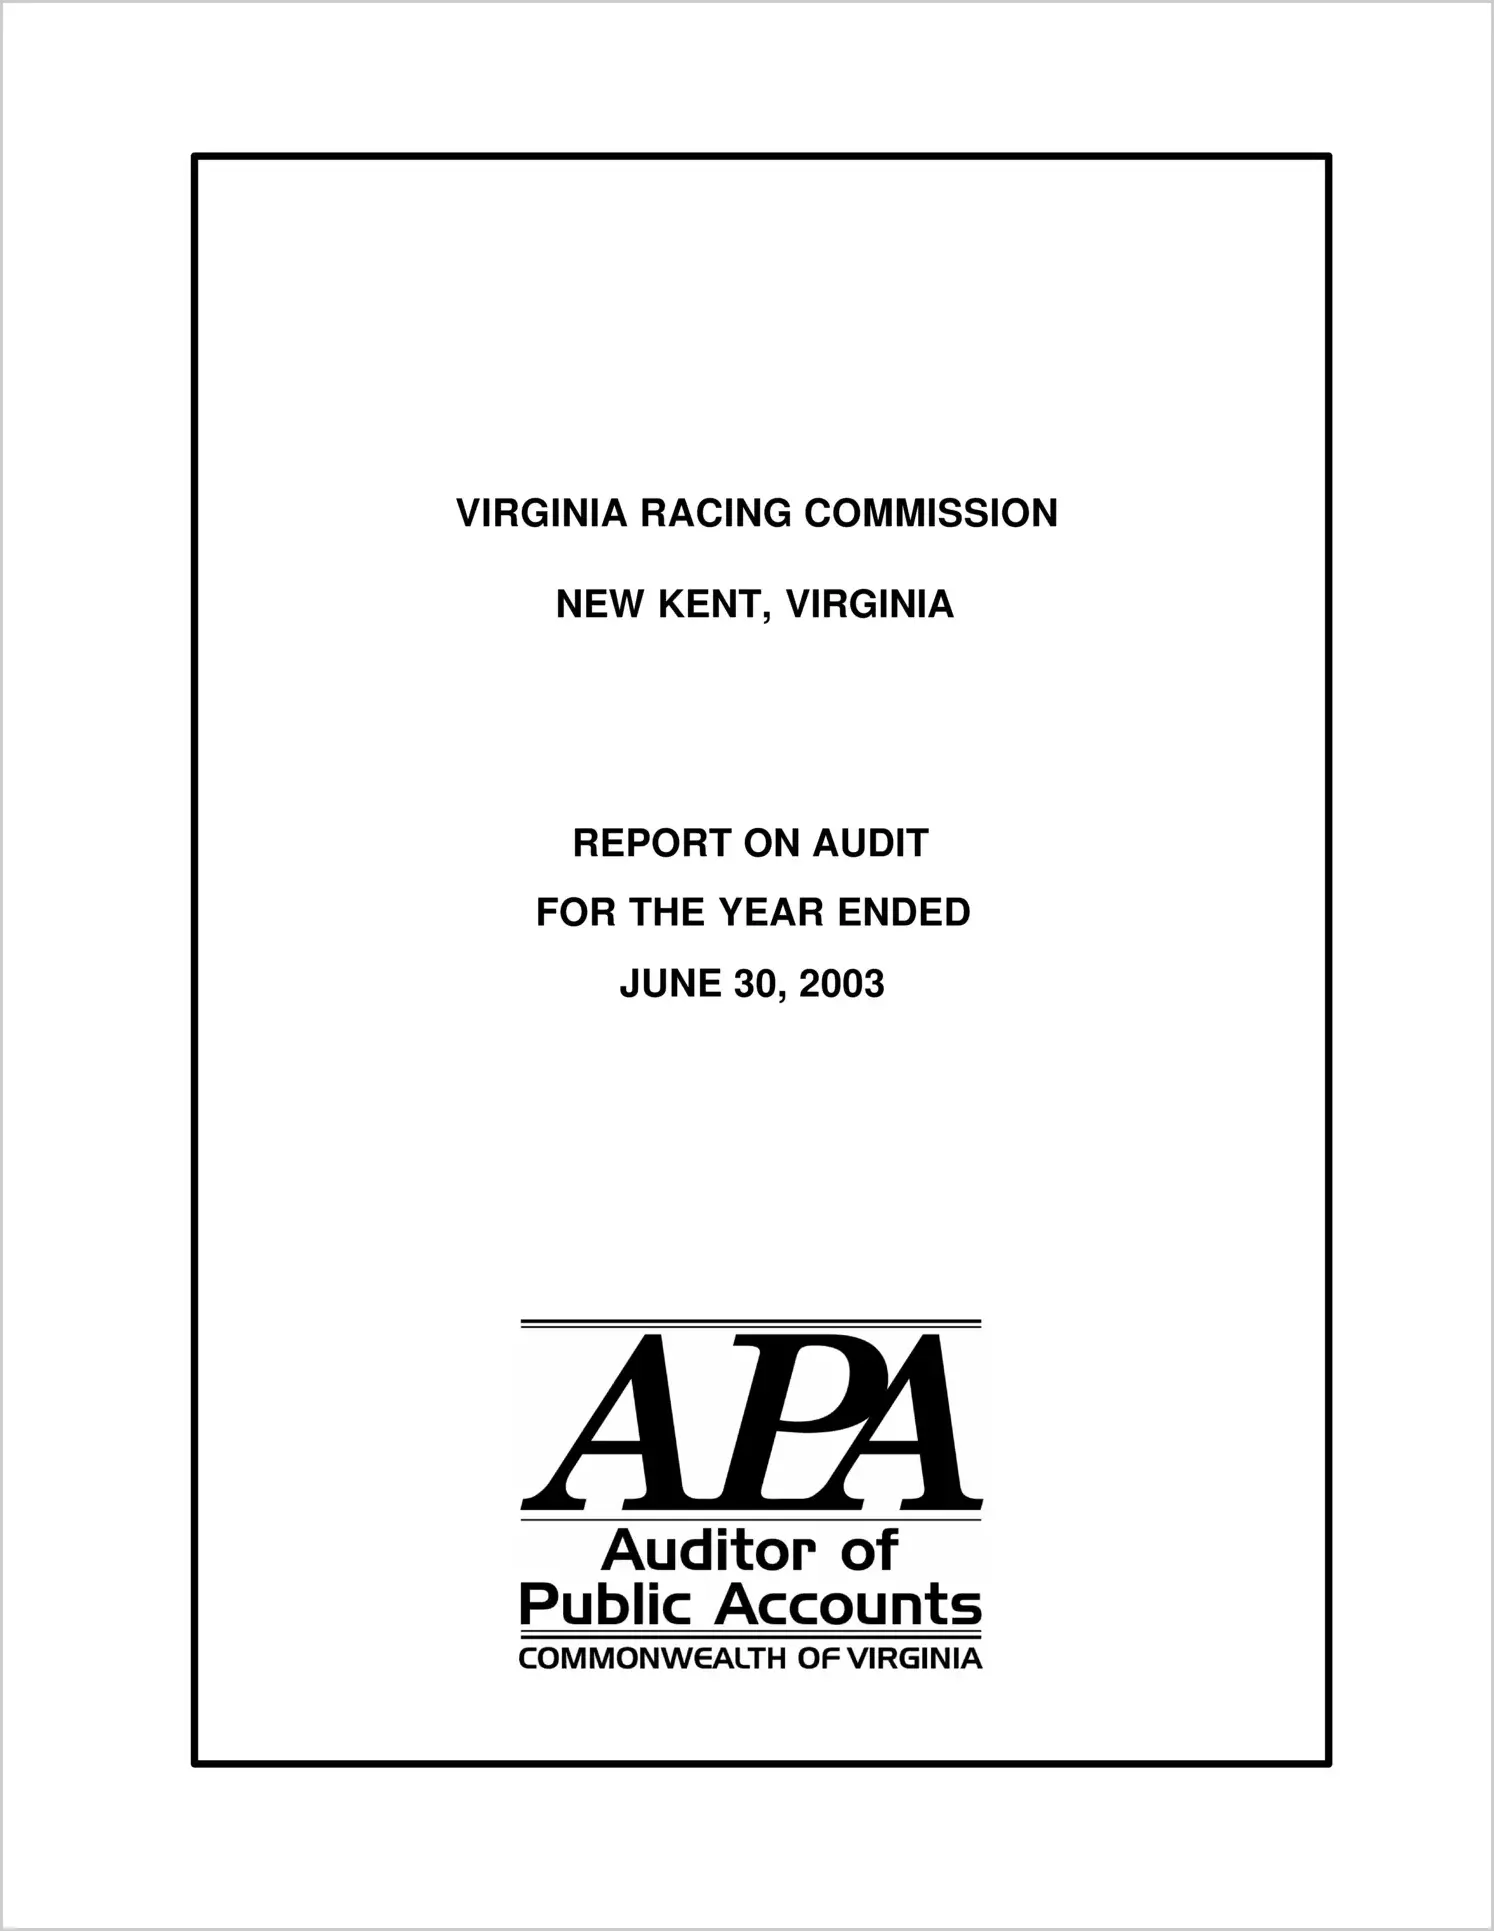 Virginia Racing Commission for the year ended June 30, 2003